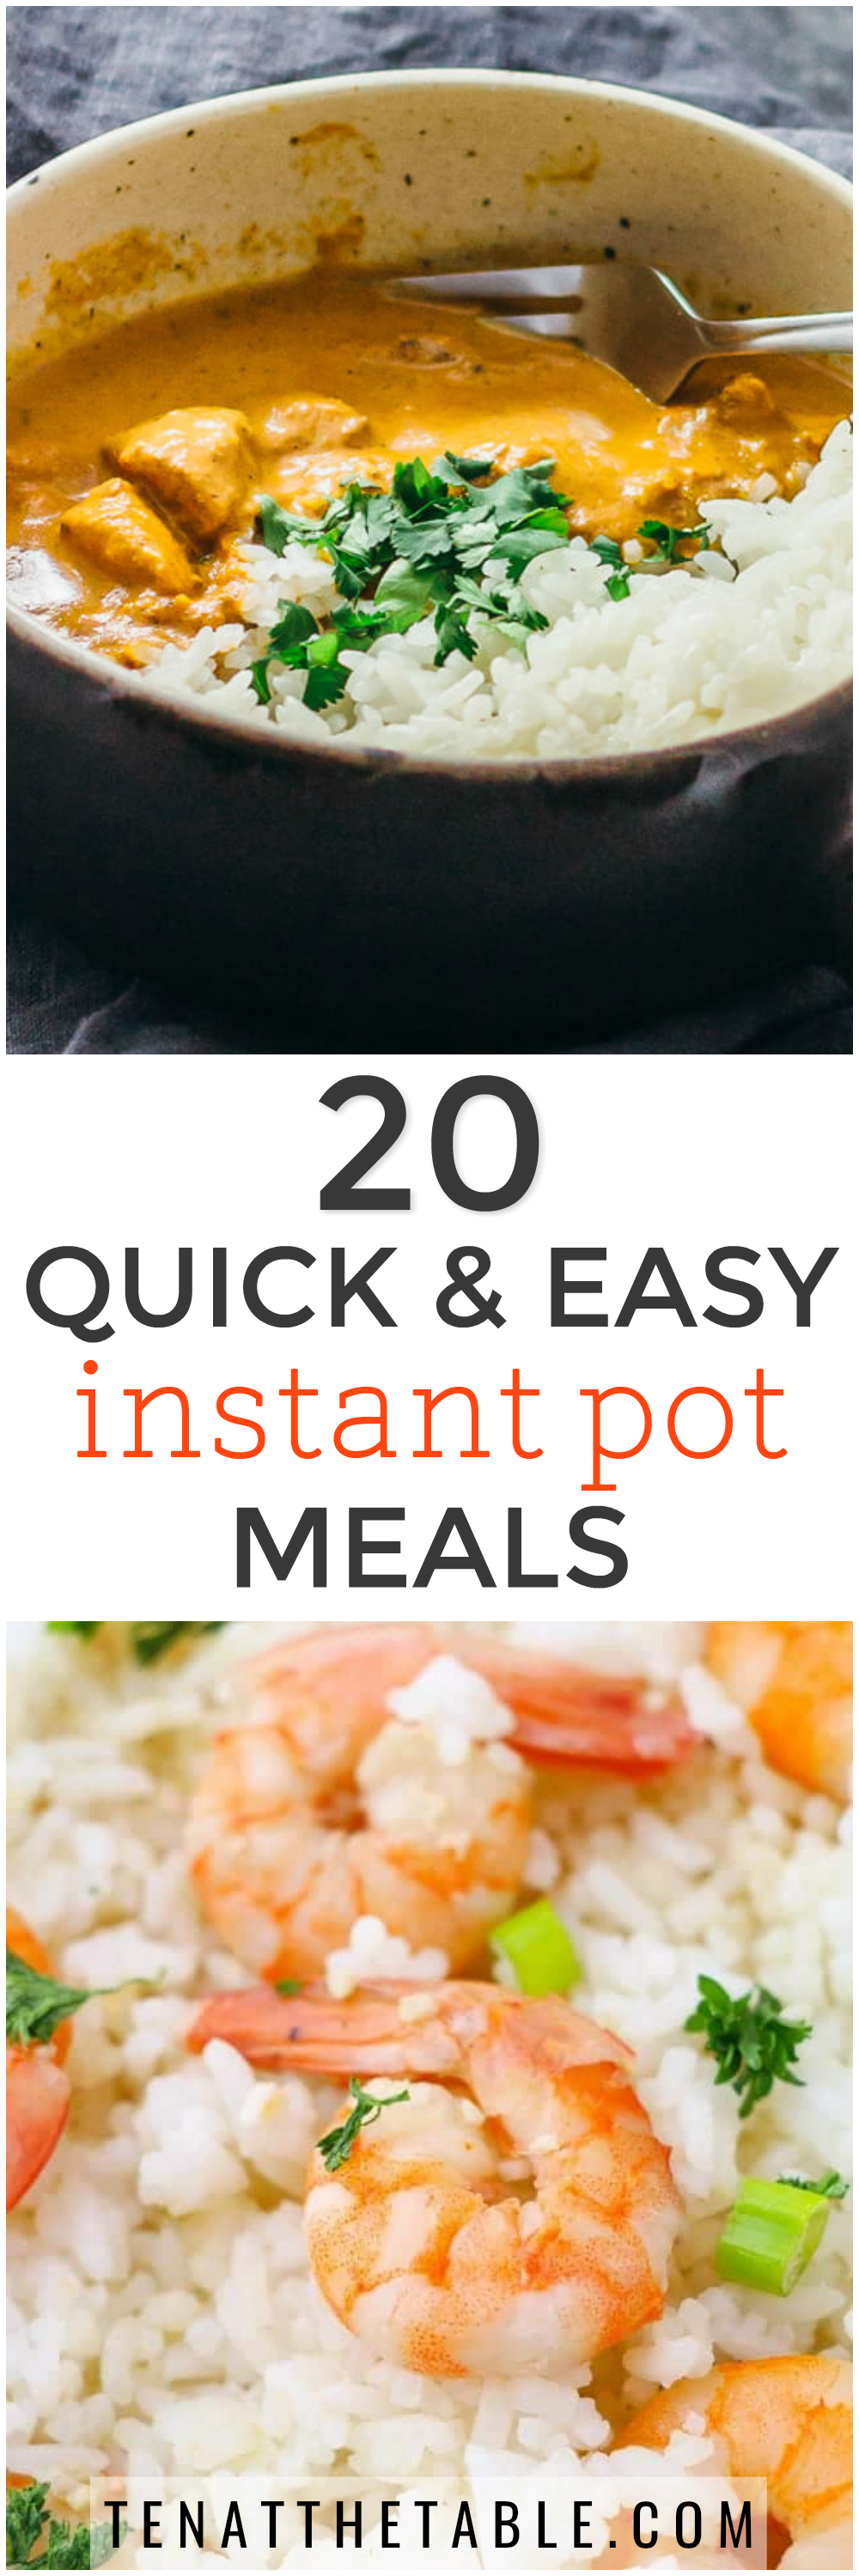 20 Quick and Easy Instant Pot Main Dish Meals | Ten at the Table